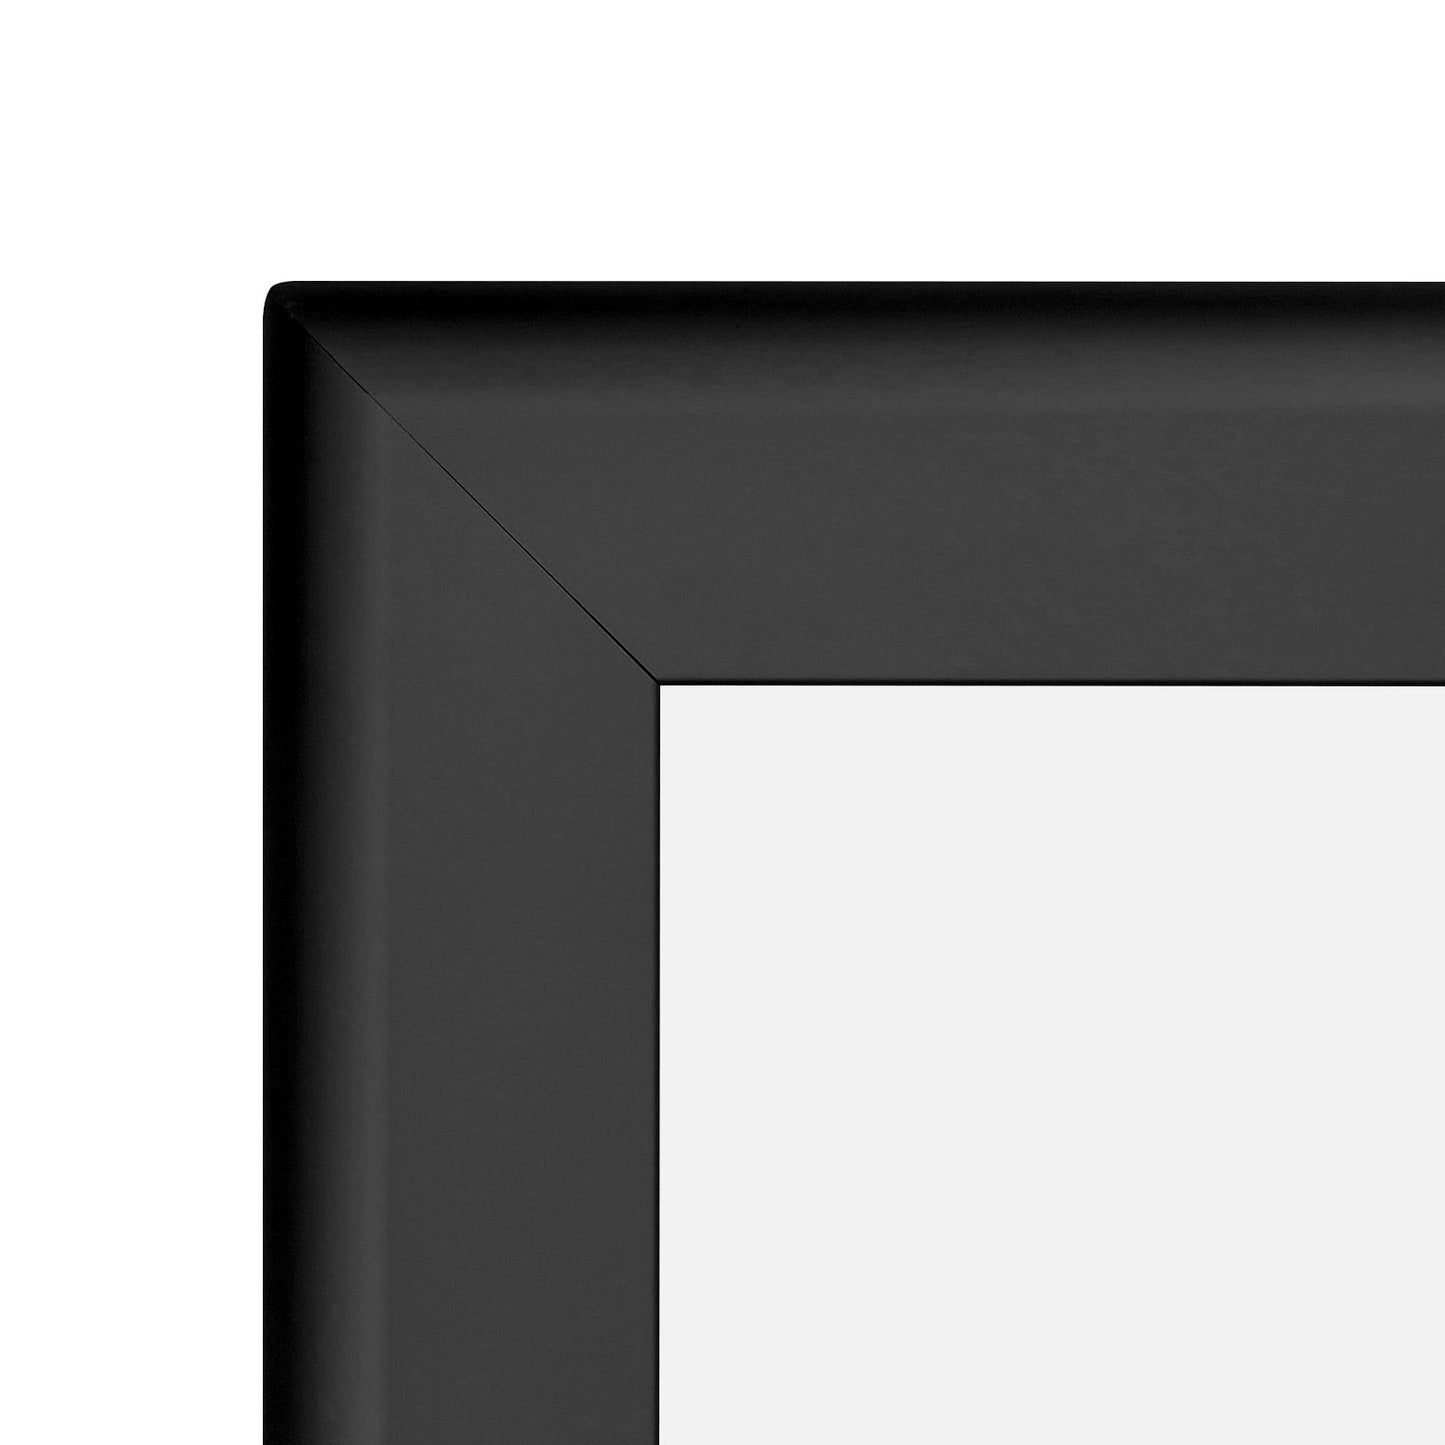 34x44 Inches Black SnapeZo® Snap Frame - 1.7" profile - Snap Frames Direct